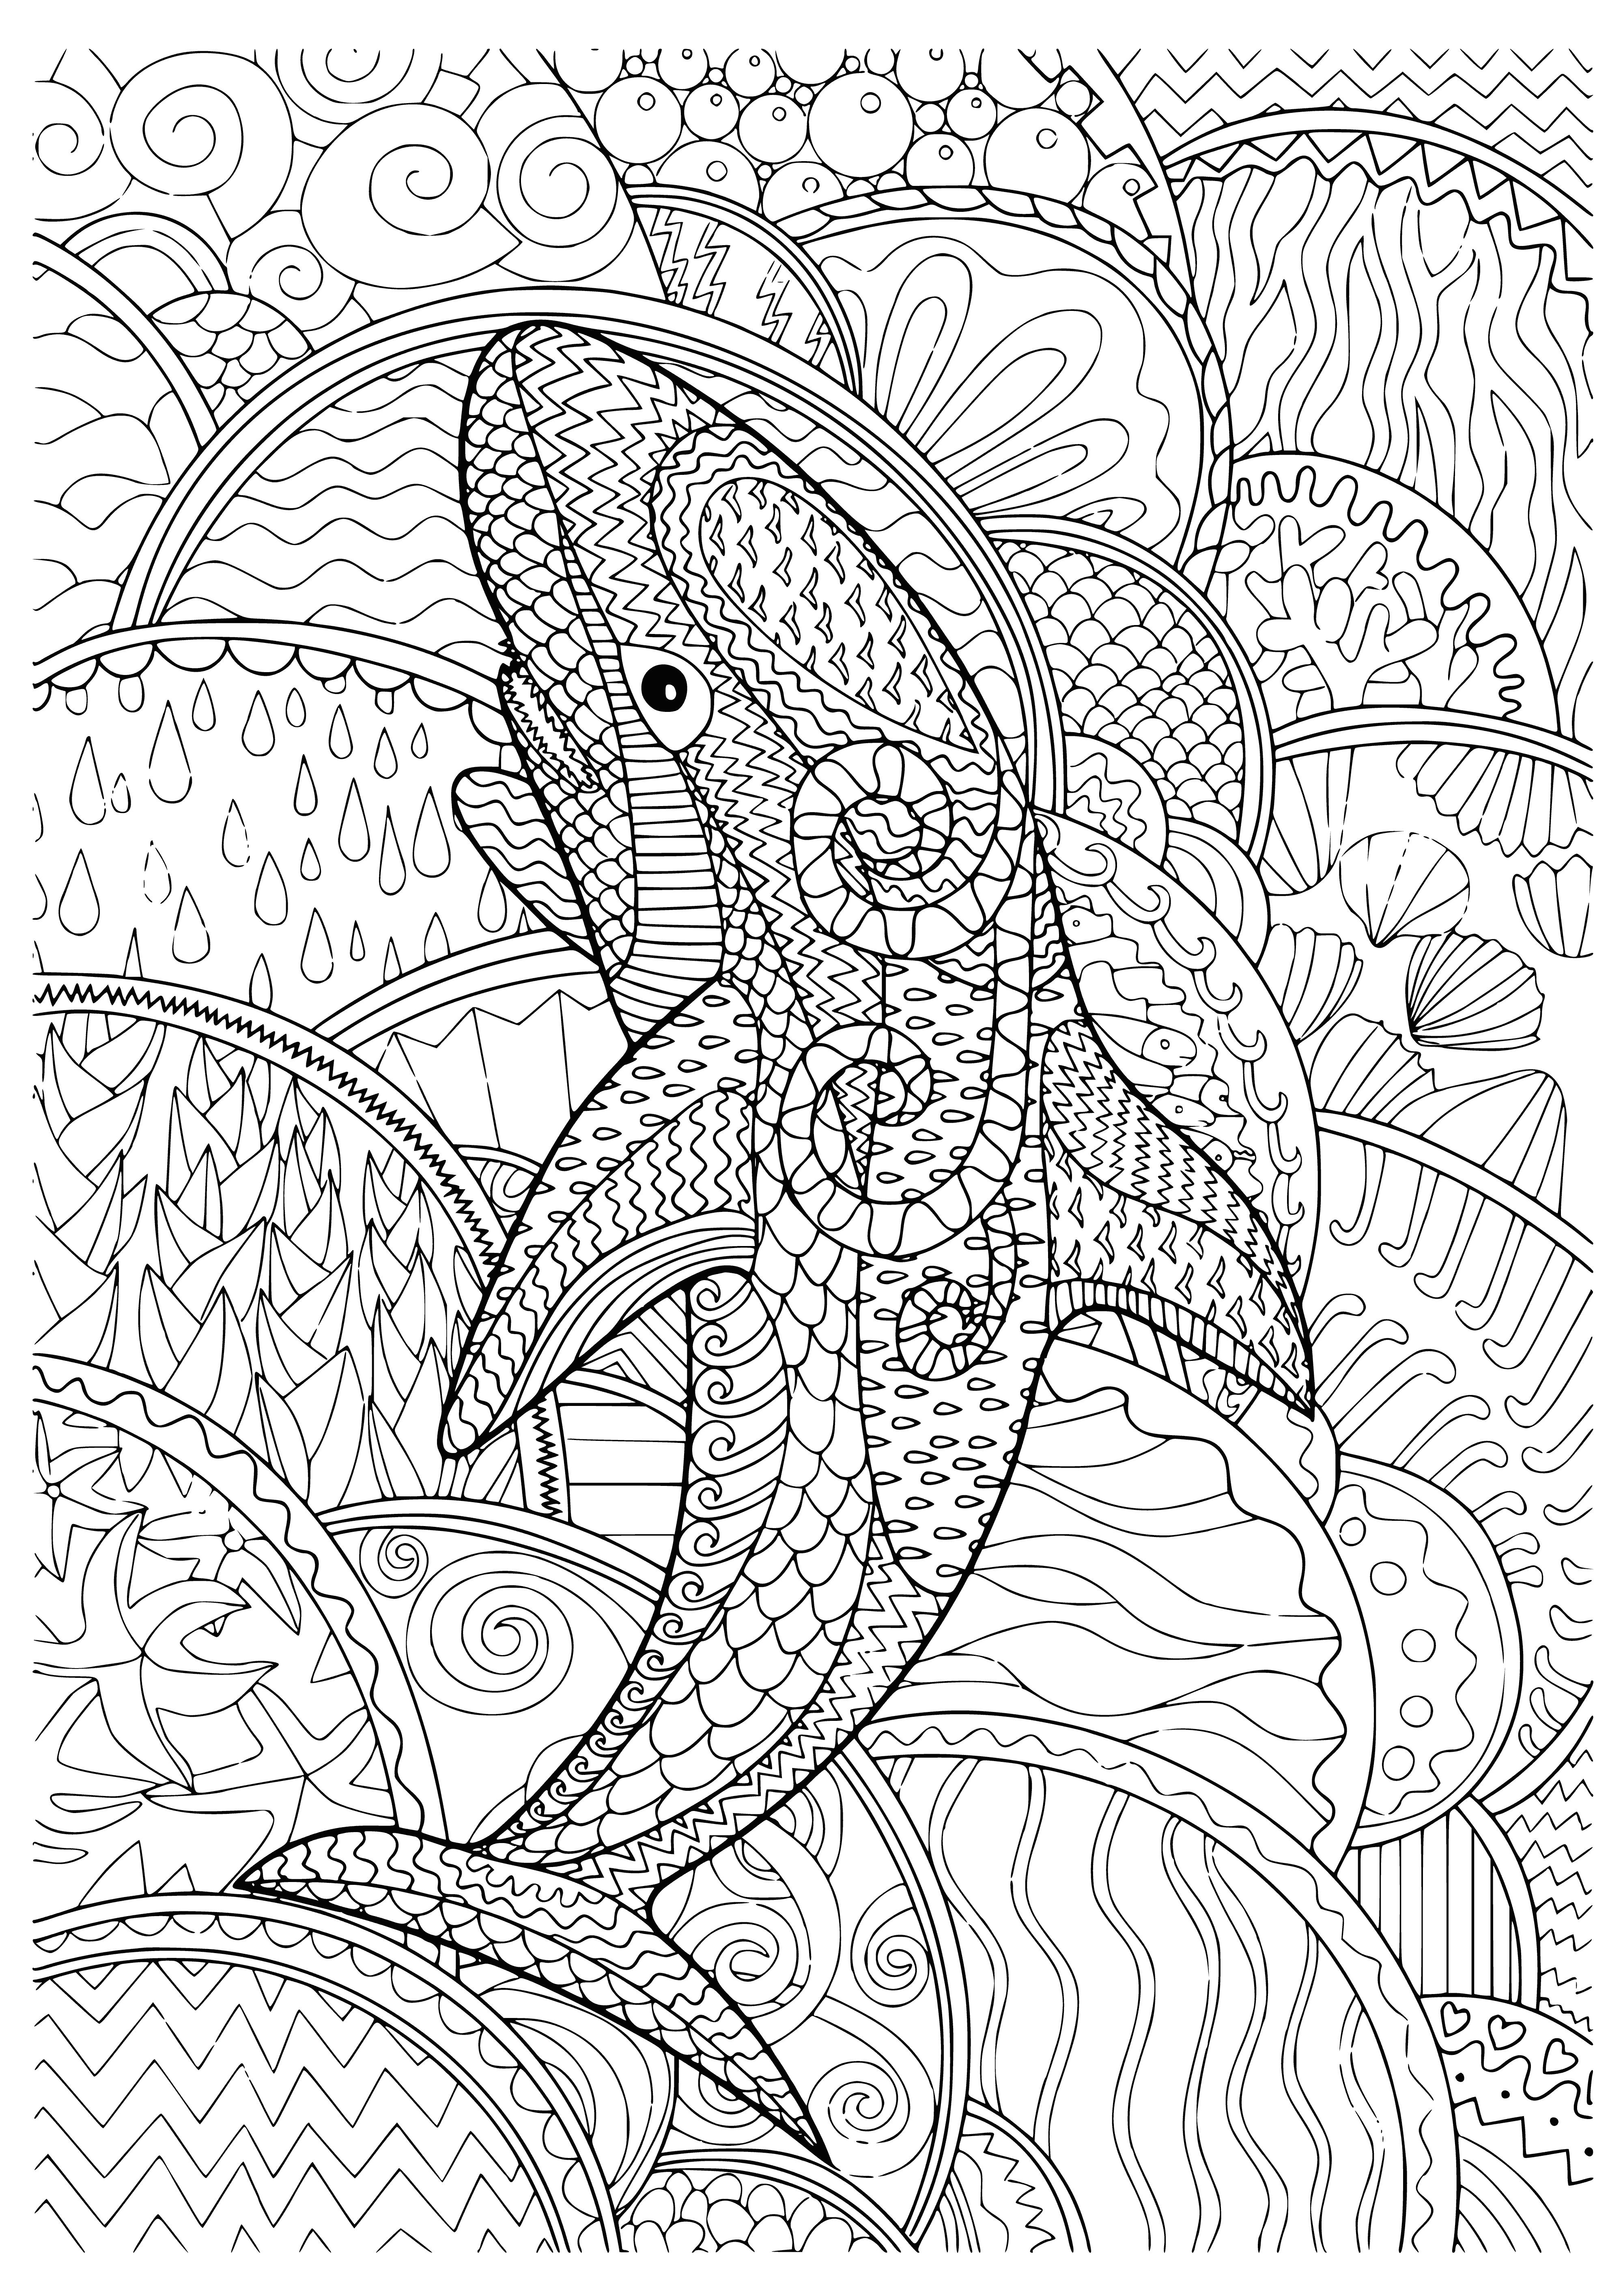 coloring page: Shark: large, cartilaginous fish w/ long, flat body, wide snout, dark blue upper surface & white underside. Has large 1st dorsal/small 2nd dorsal & anal fin, long curved tail & sharp triangular teeth.